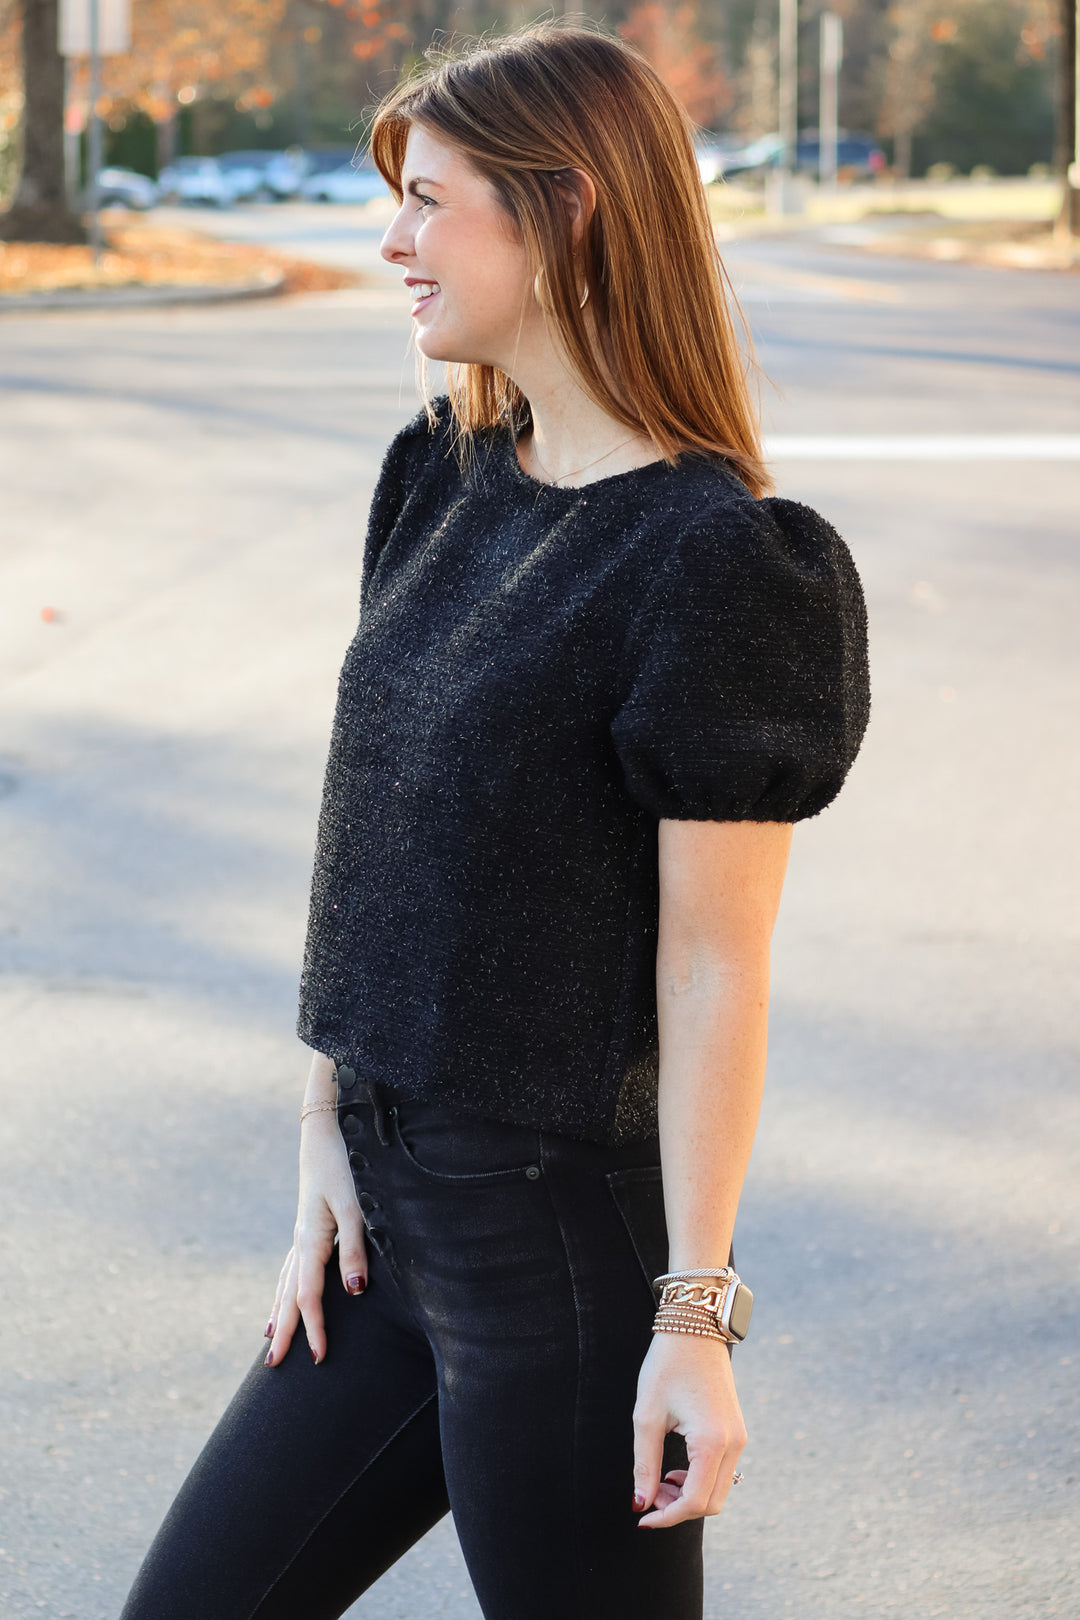 A brunette woman standing outside wearing a soft and shiny black top with short bubble sleeves and black jeans.